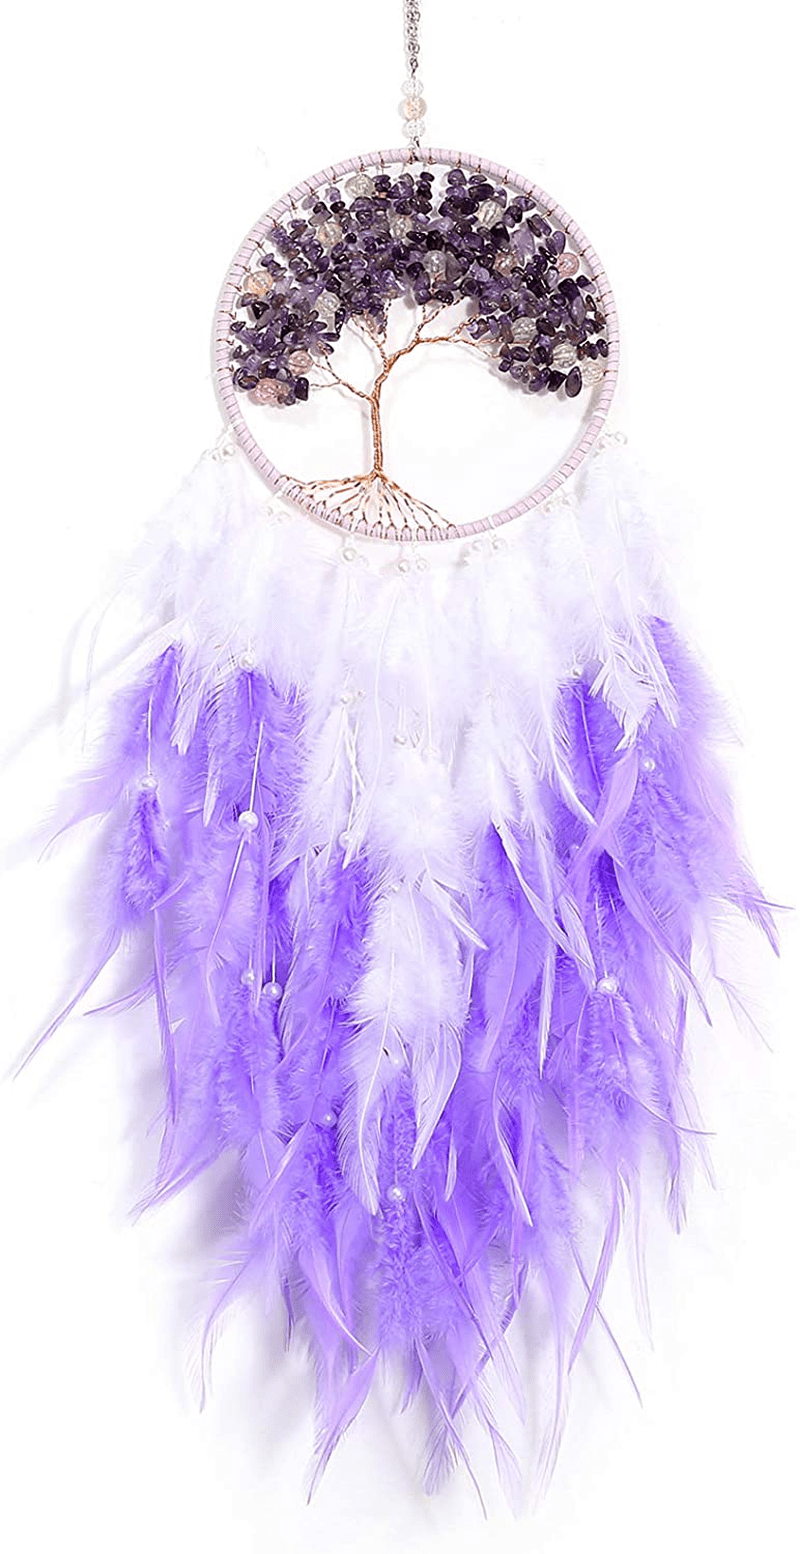 XMSJSIY Tree of Life Dream Catcher,Dream Catcher,Large Handmade Feather Mobile Wall Hanging Decor for Bedroom Dorm Room Decorations Home Ornament Birthday Festival Craft Gift (Purple) Home & Garden > Decor > Seasonal & Holiday Decorations XMSJSIY Purple  